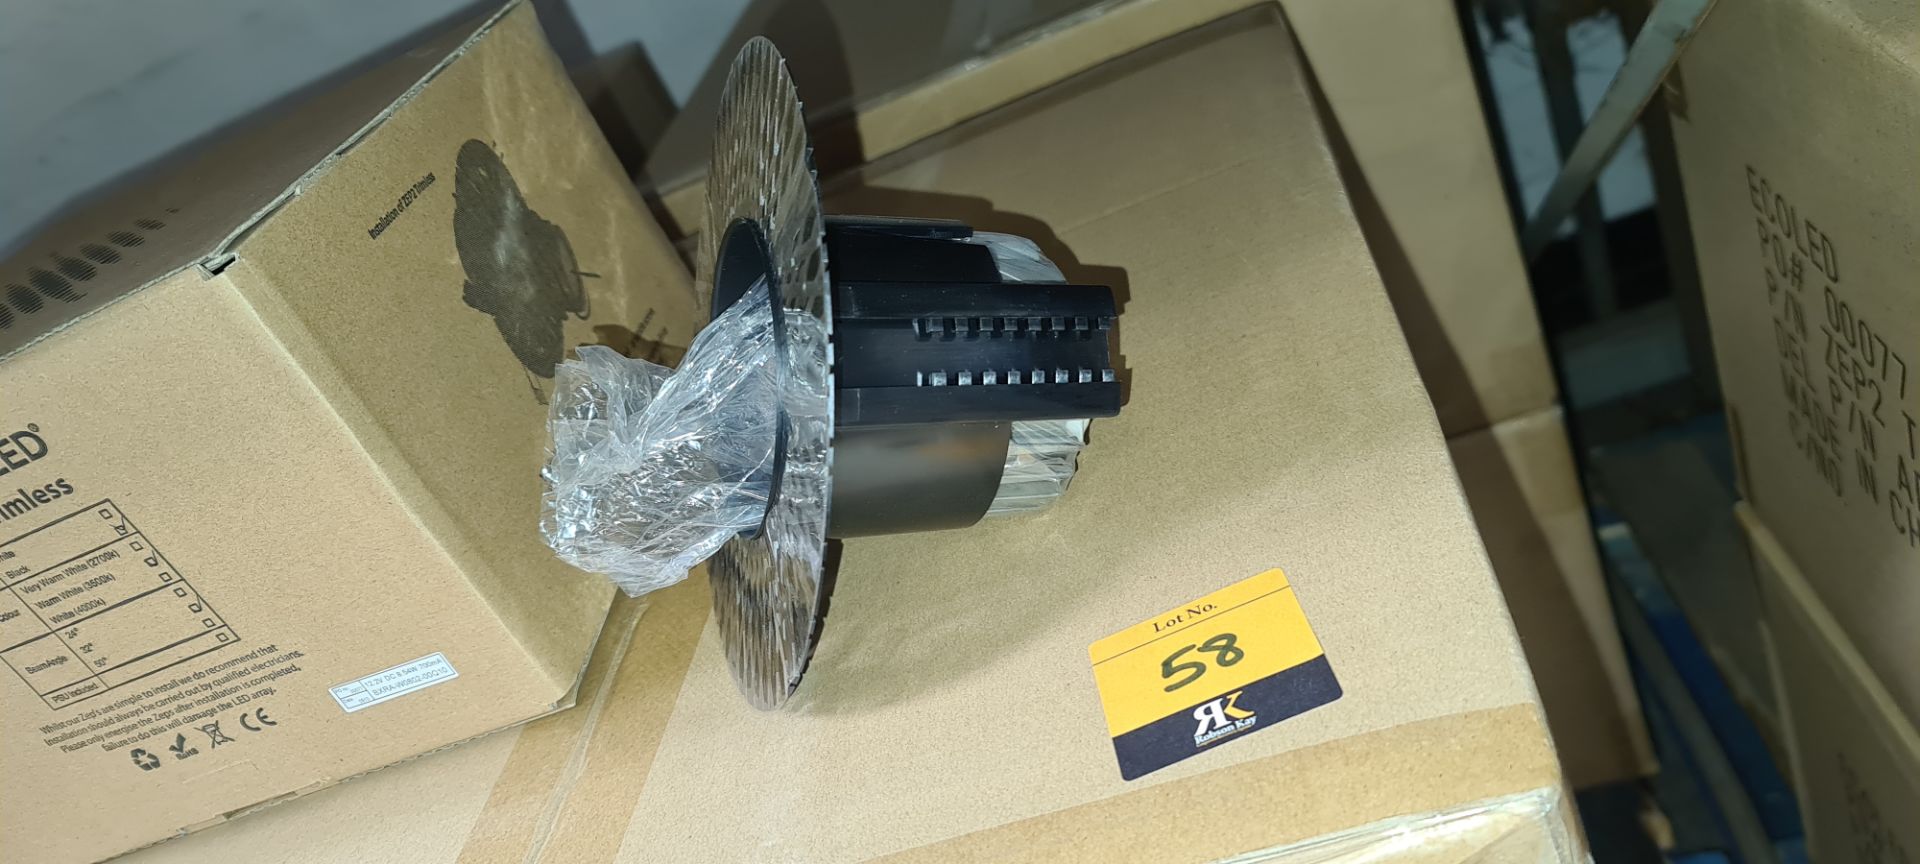 32 off downlights with trimless collars, in black, 3500K, 32° beam angle, product code ZEP2TL32W/W. - Image 5 of 10